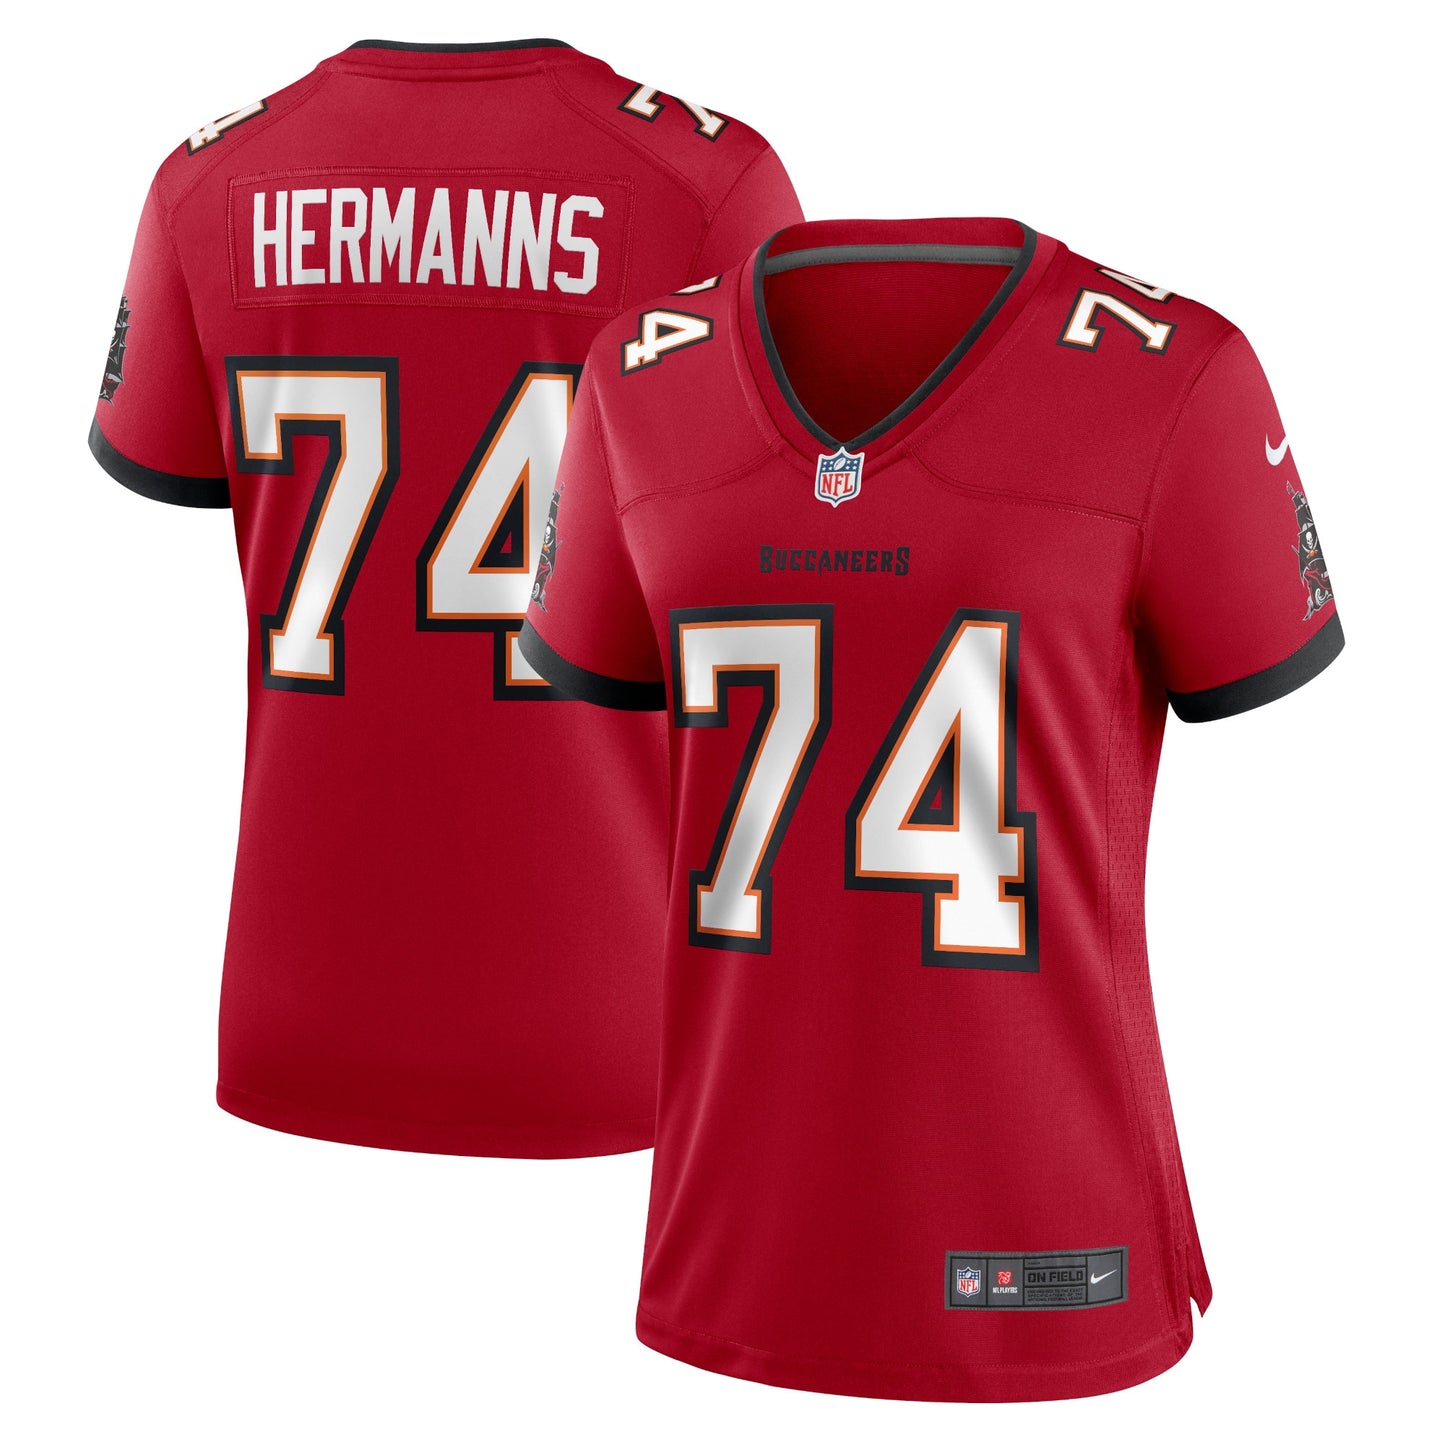 Grant Hermanns Tampa Bay Buccaneers Nike Women's Home Game Player Jersey - Red